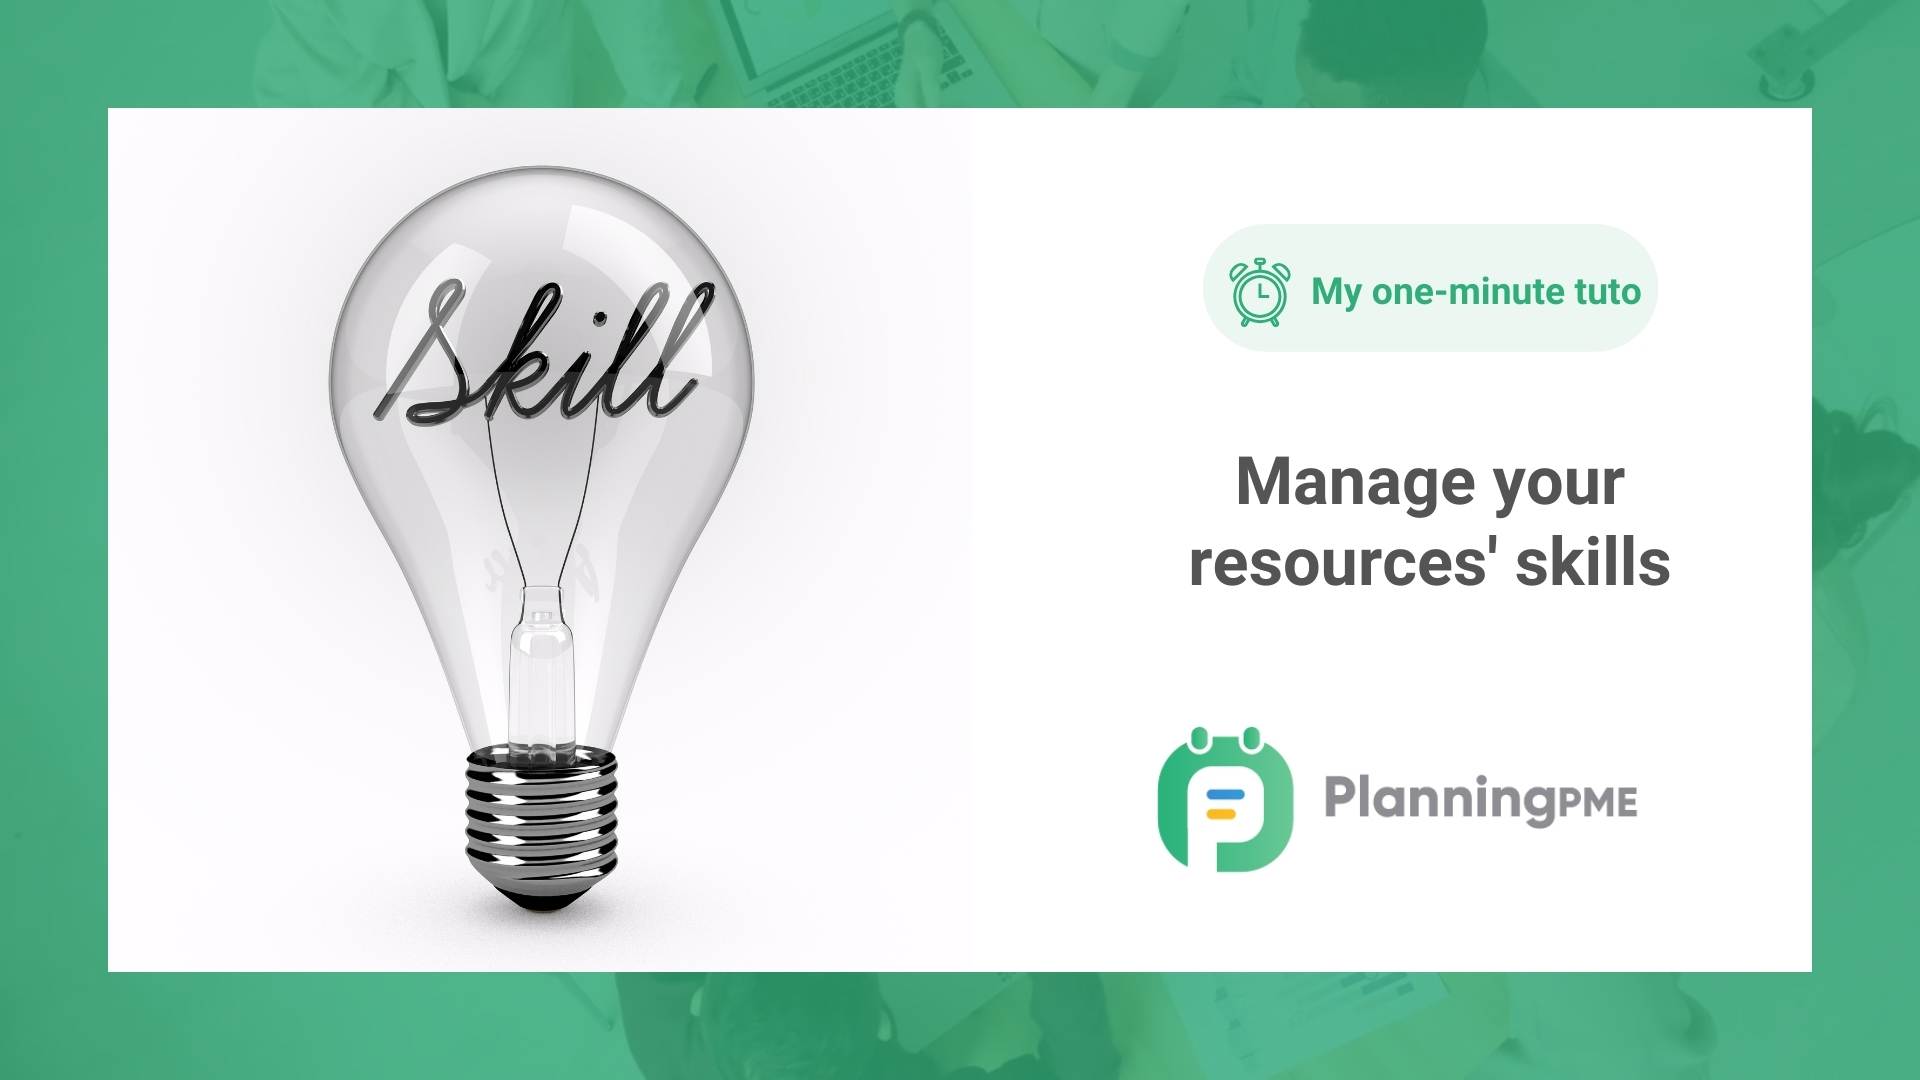 >How to manage the skills of your resources